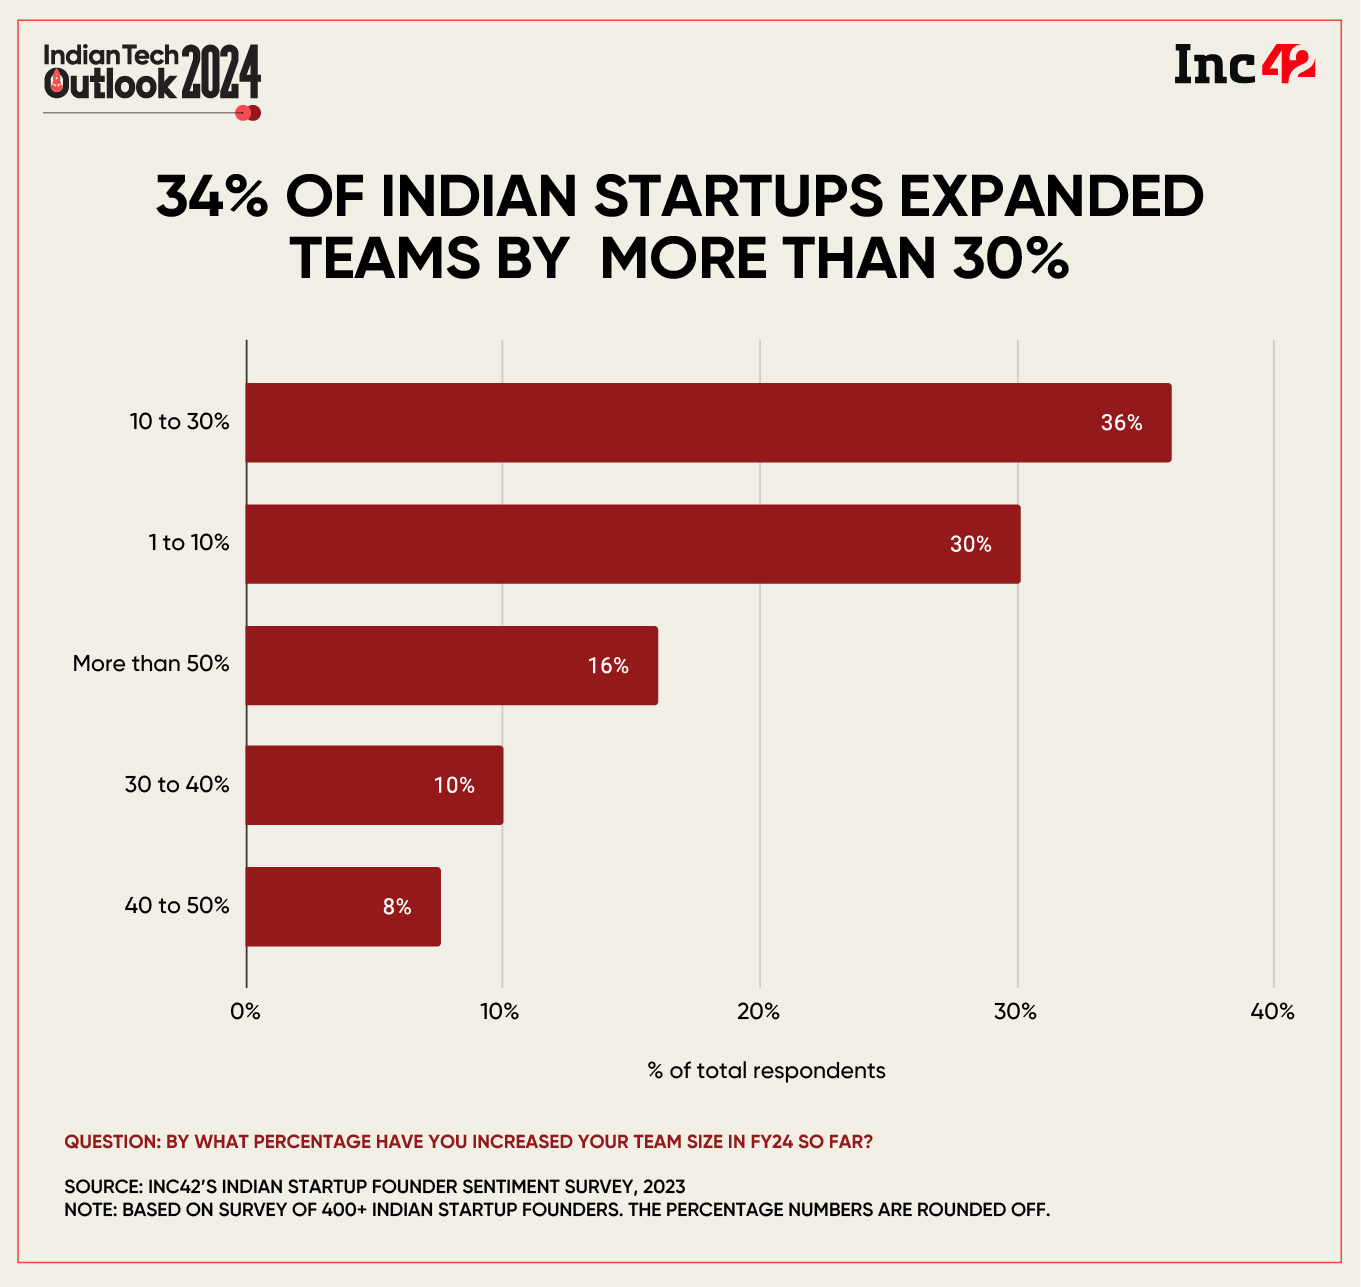 Inc42’s annual Indian Startup Founder Sentiment Survey, 2023 highlights that 34% of the surveyed startups expanded their teams by more than 30% between April and December last year.